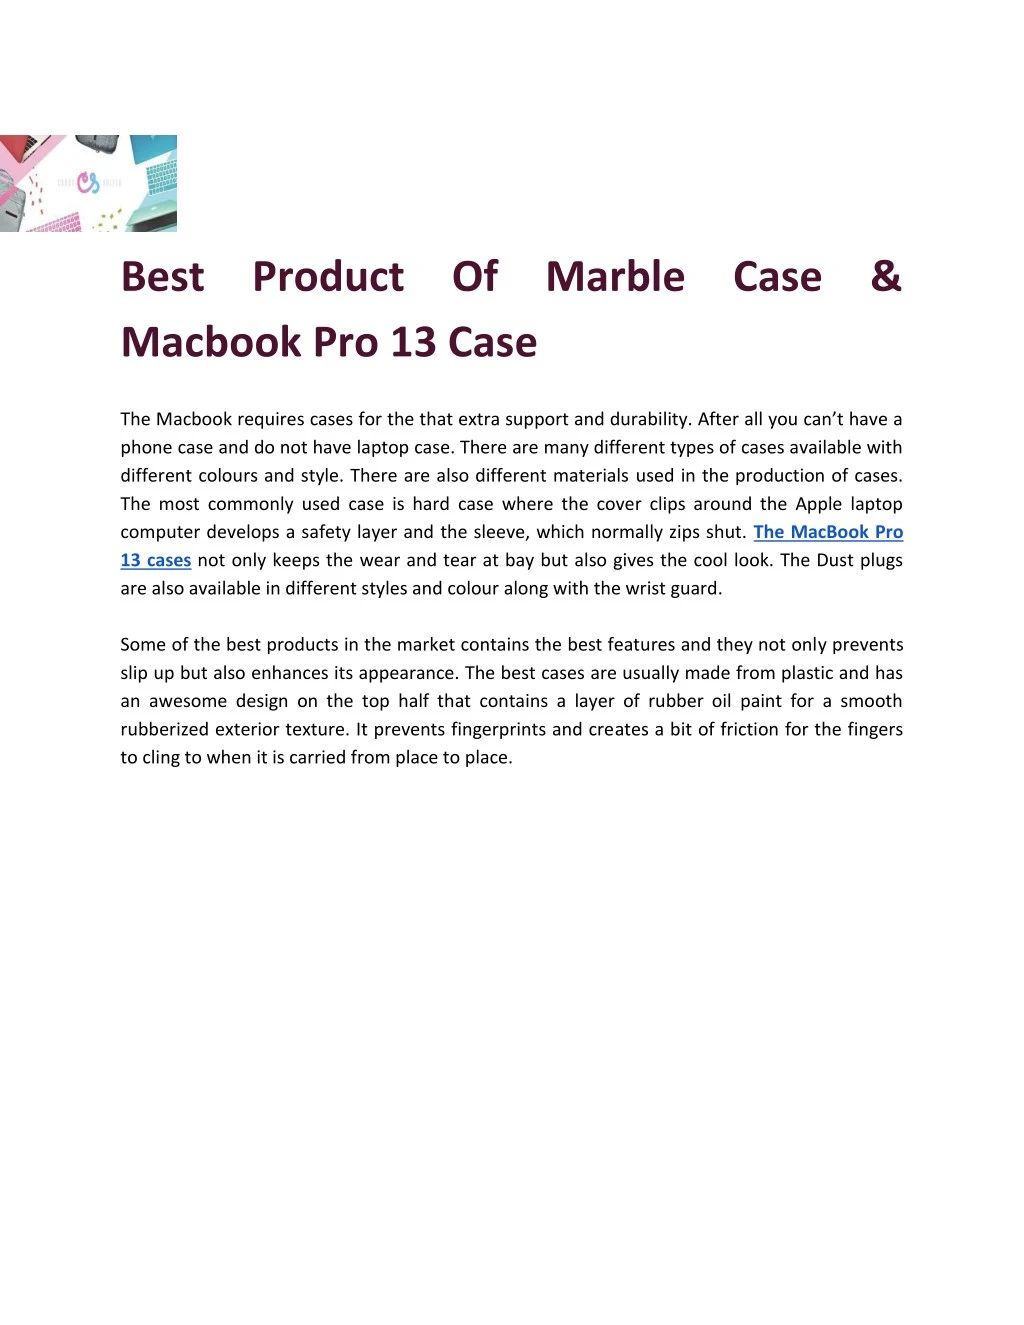 best product of marble case macbook pro 13 case